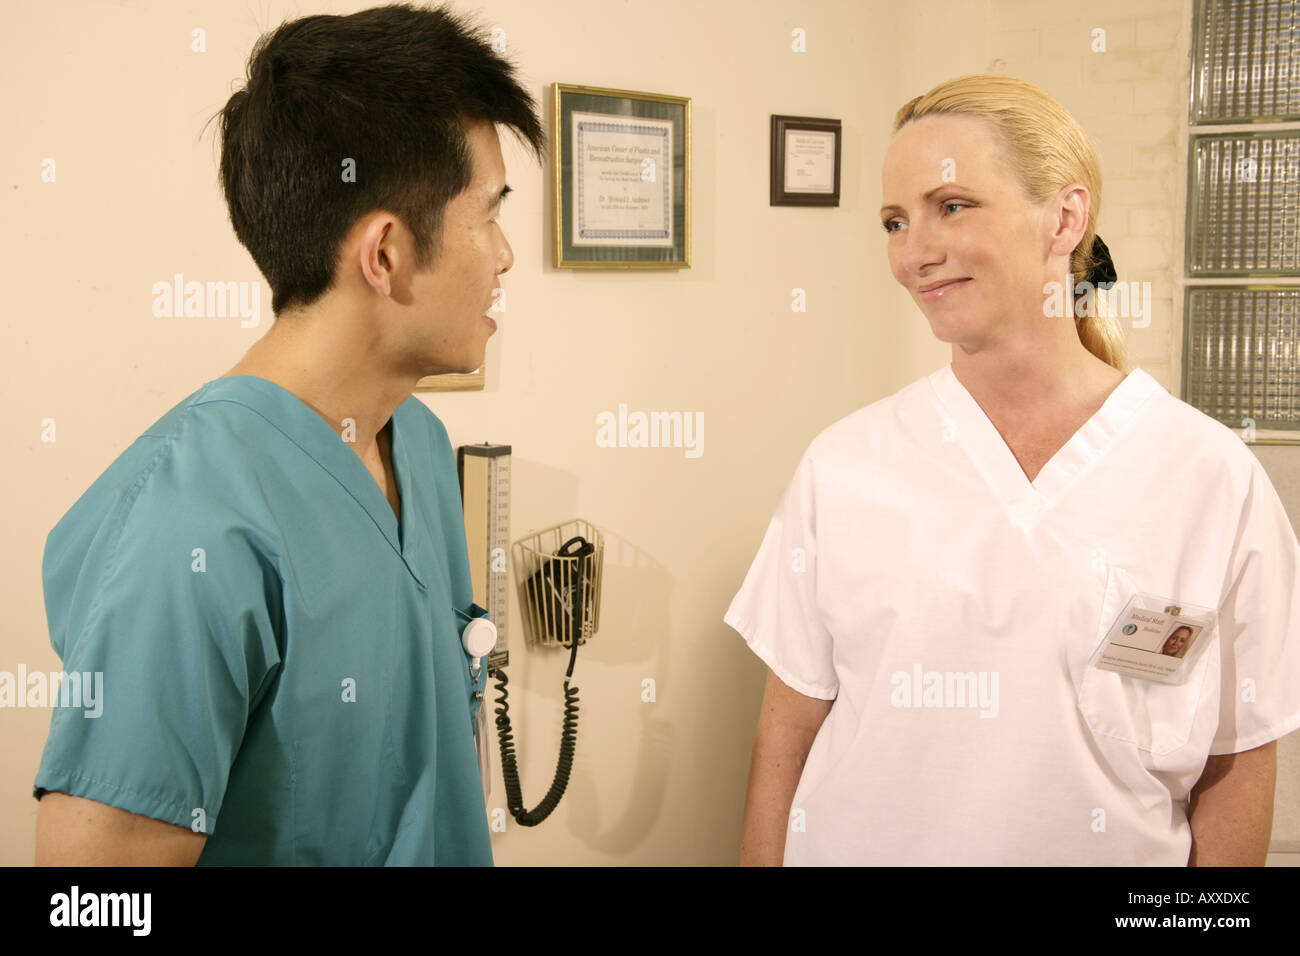 Medical staff talking in the medical exam room. Stock Photo